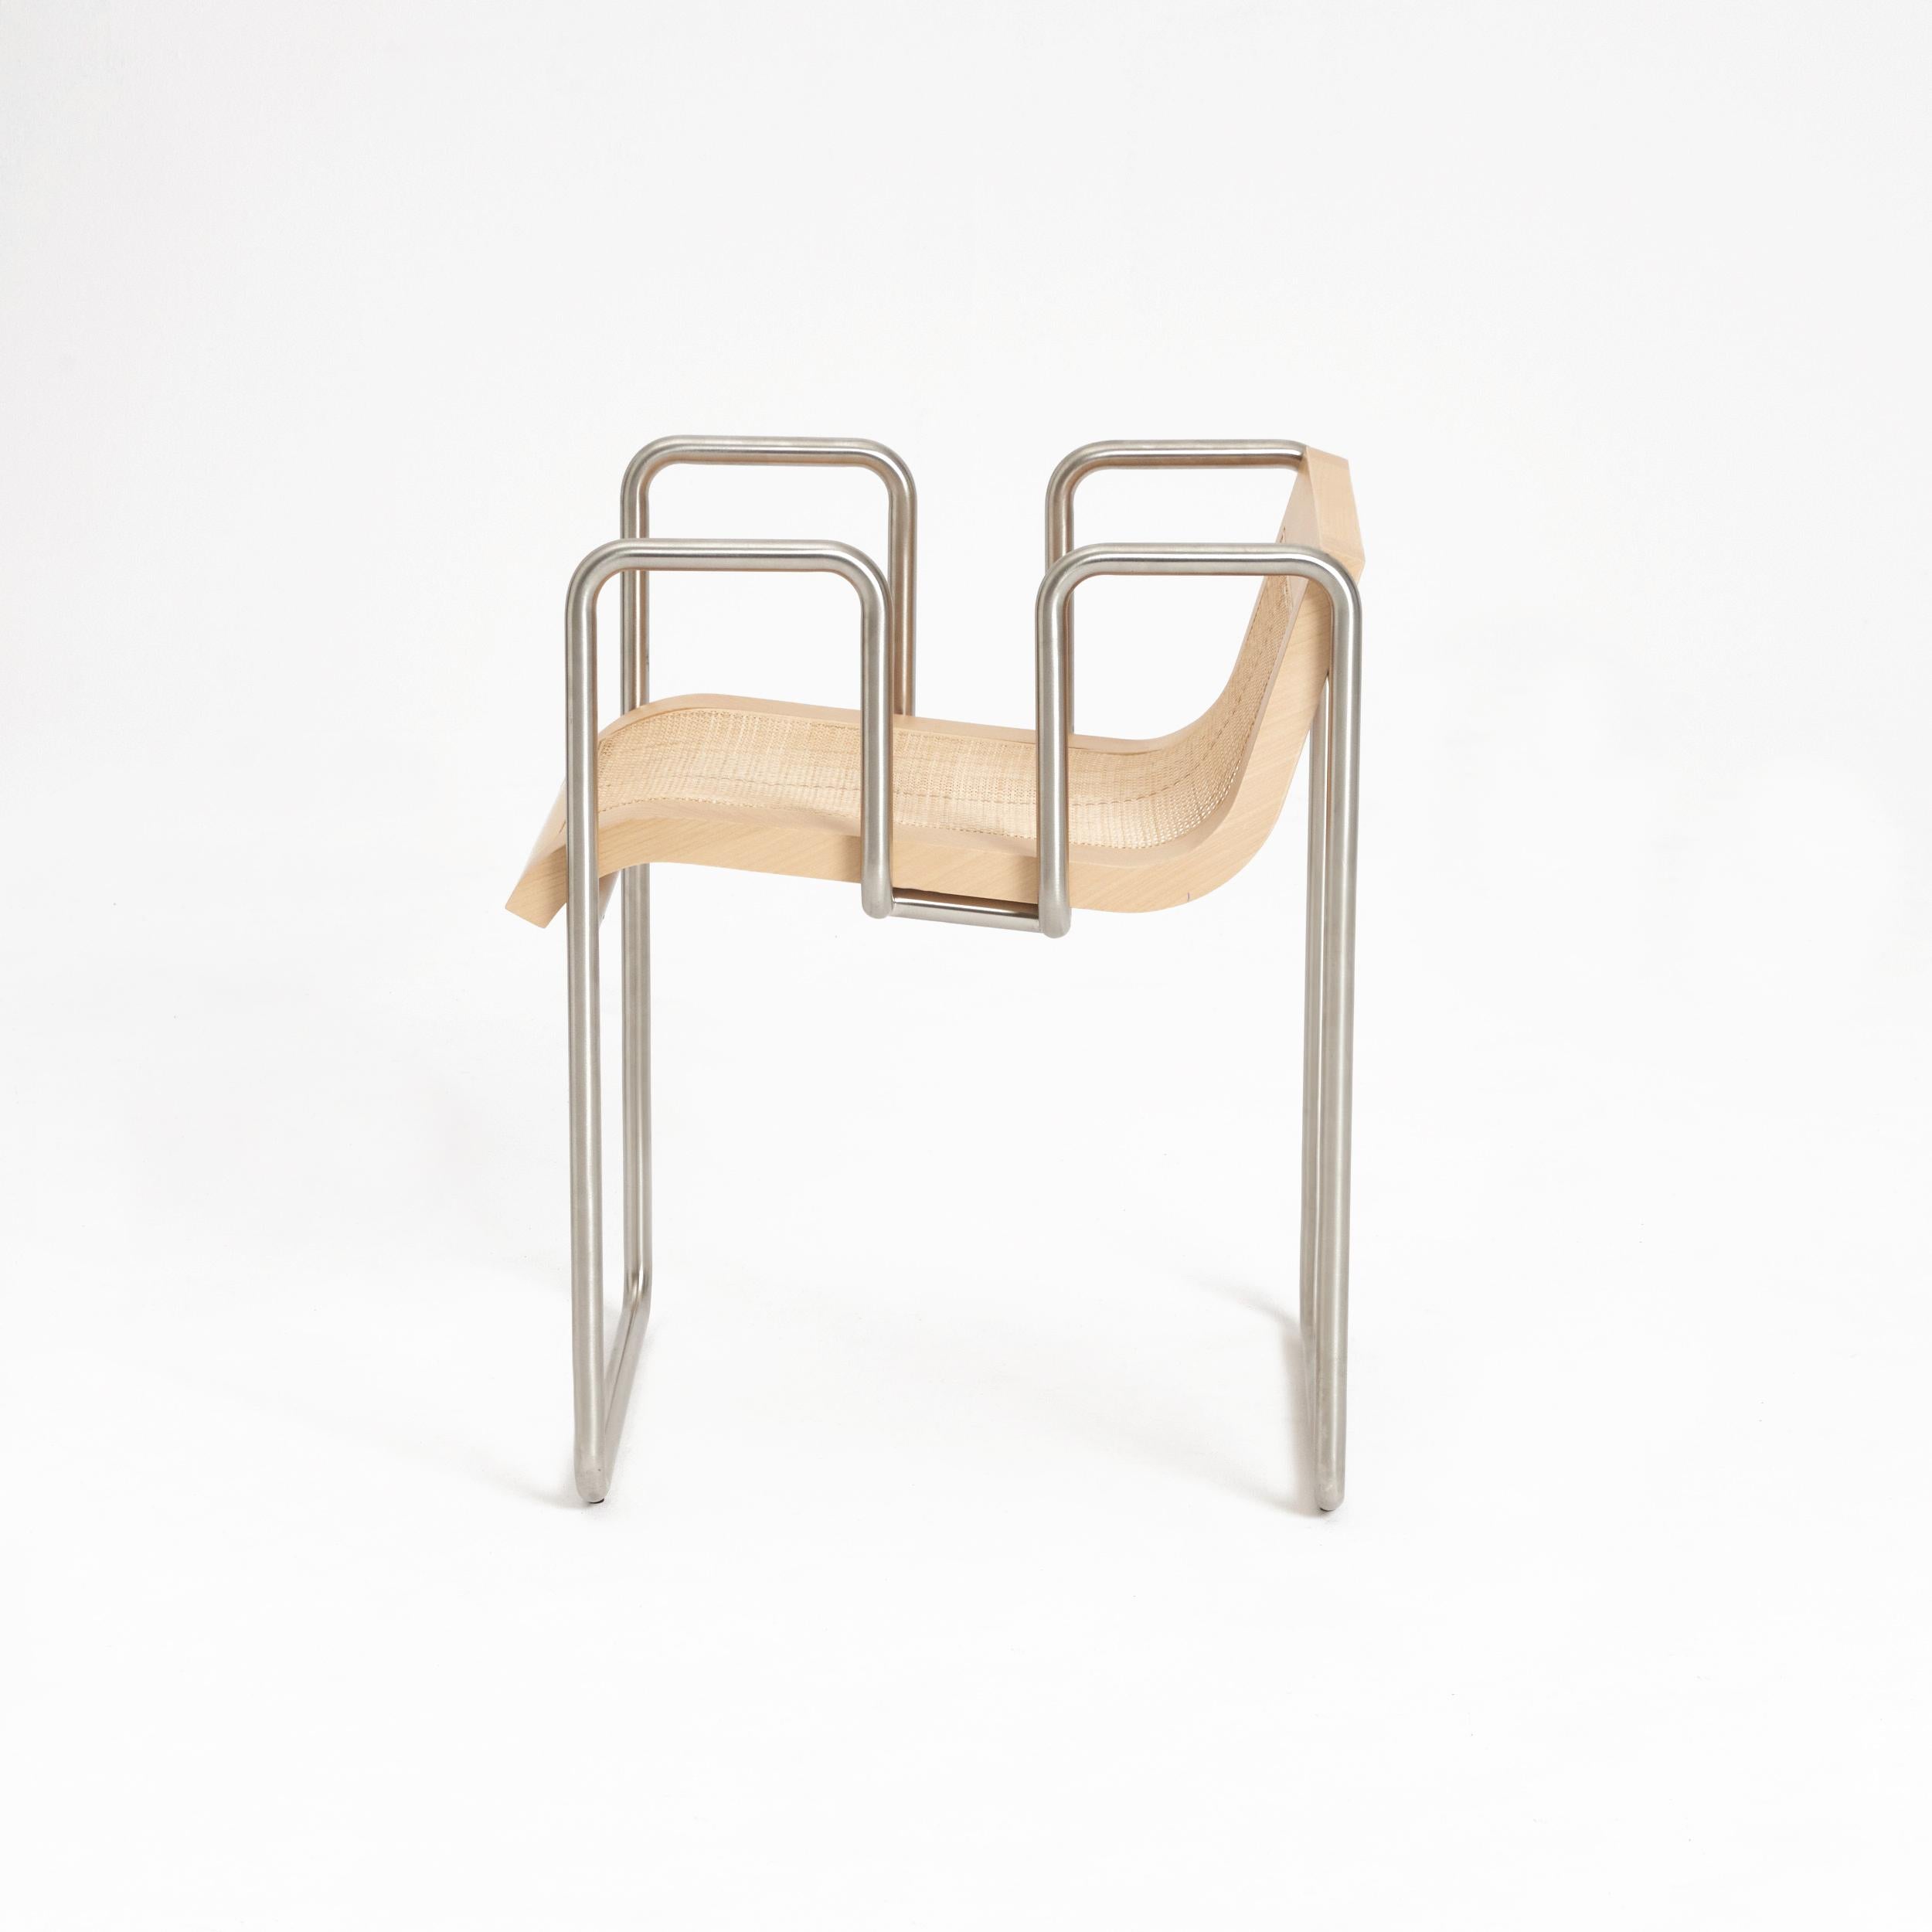 Portuguese Take a Seat in Natural by Project 213A